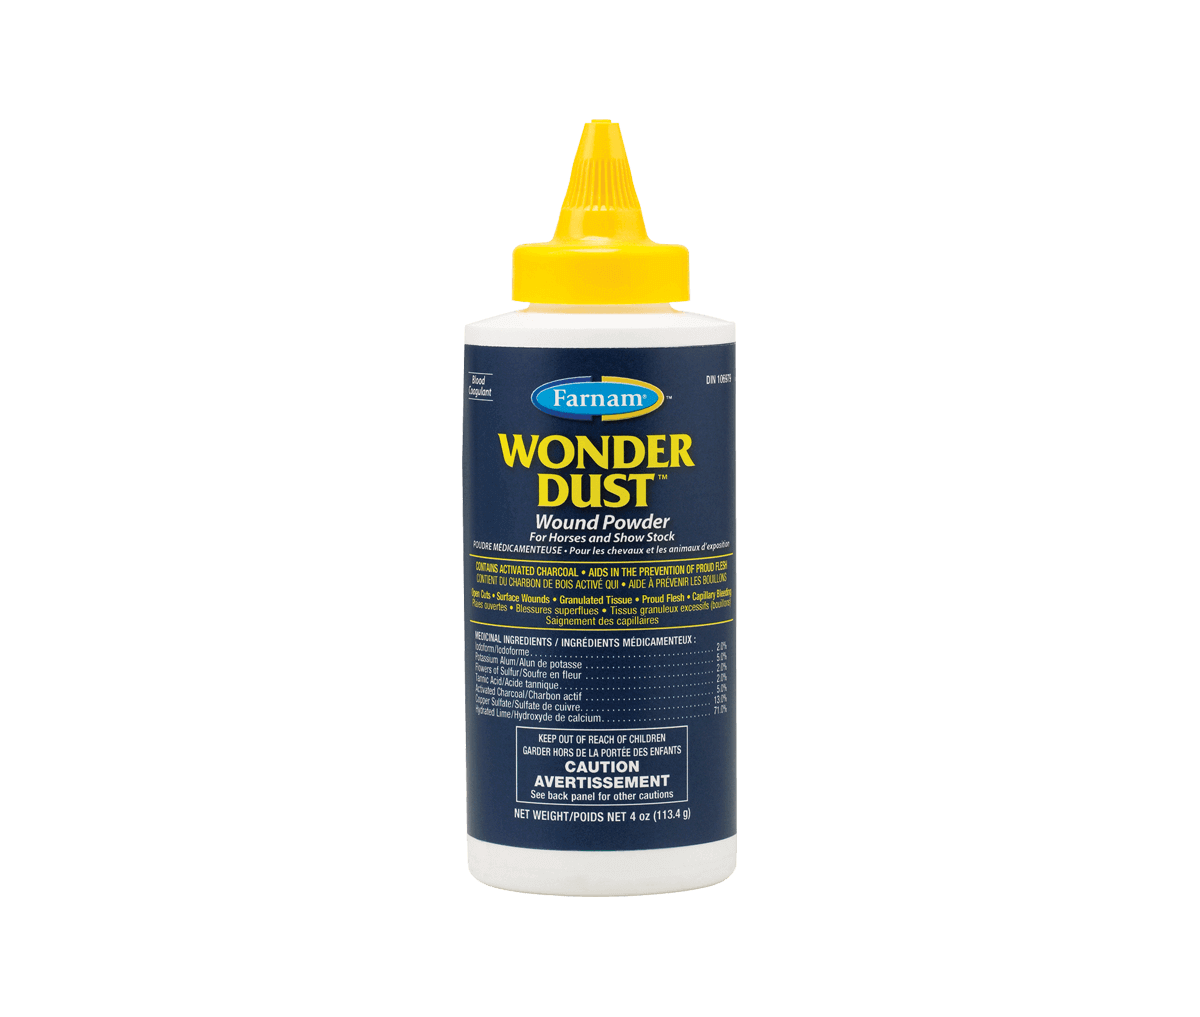 Wound-Kote Blue Lotion Spray for Horses & Dogs